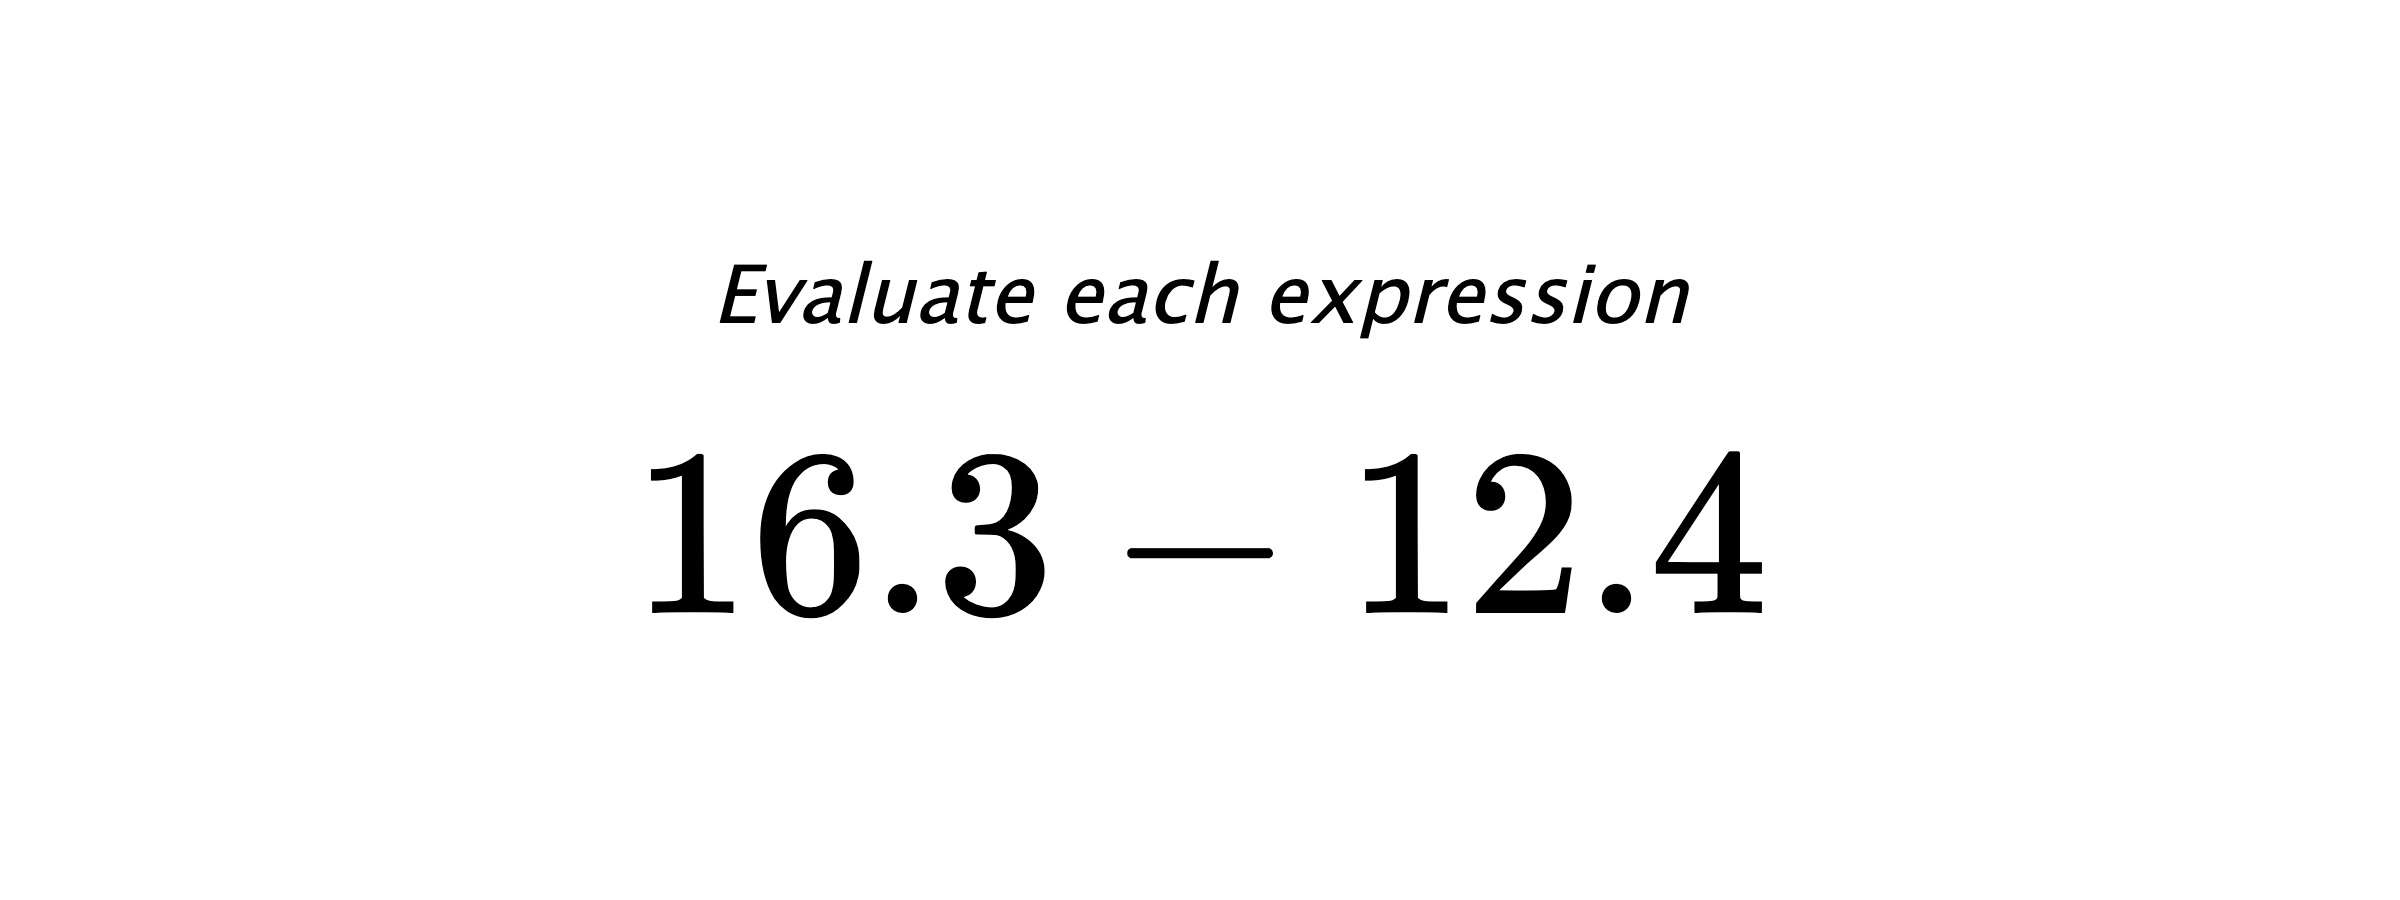 Evaluate each expression $ 16.3-12.4 $